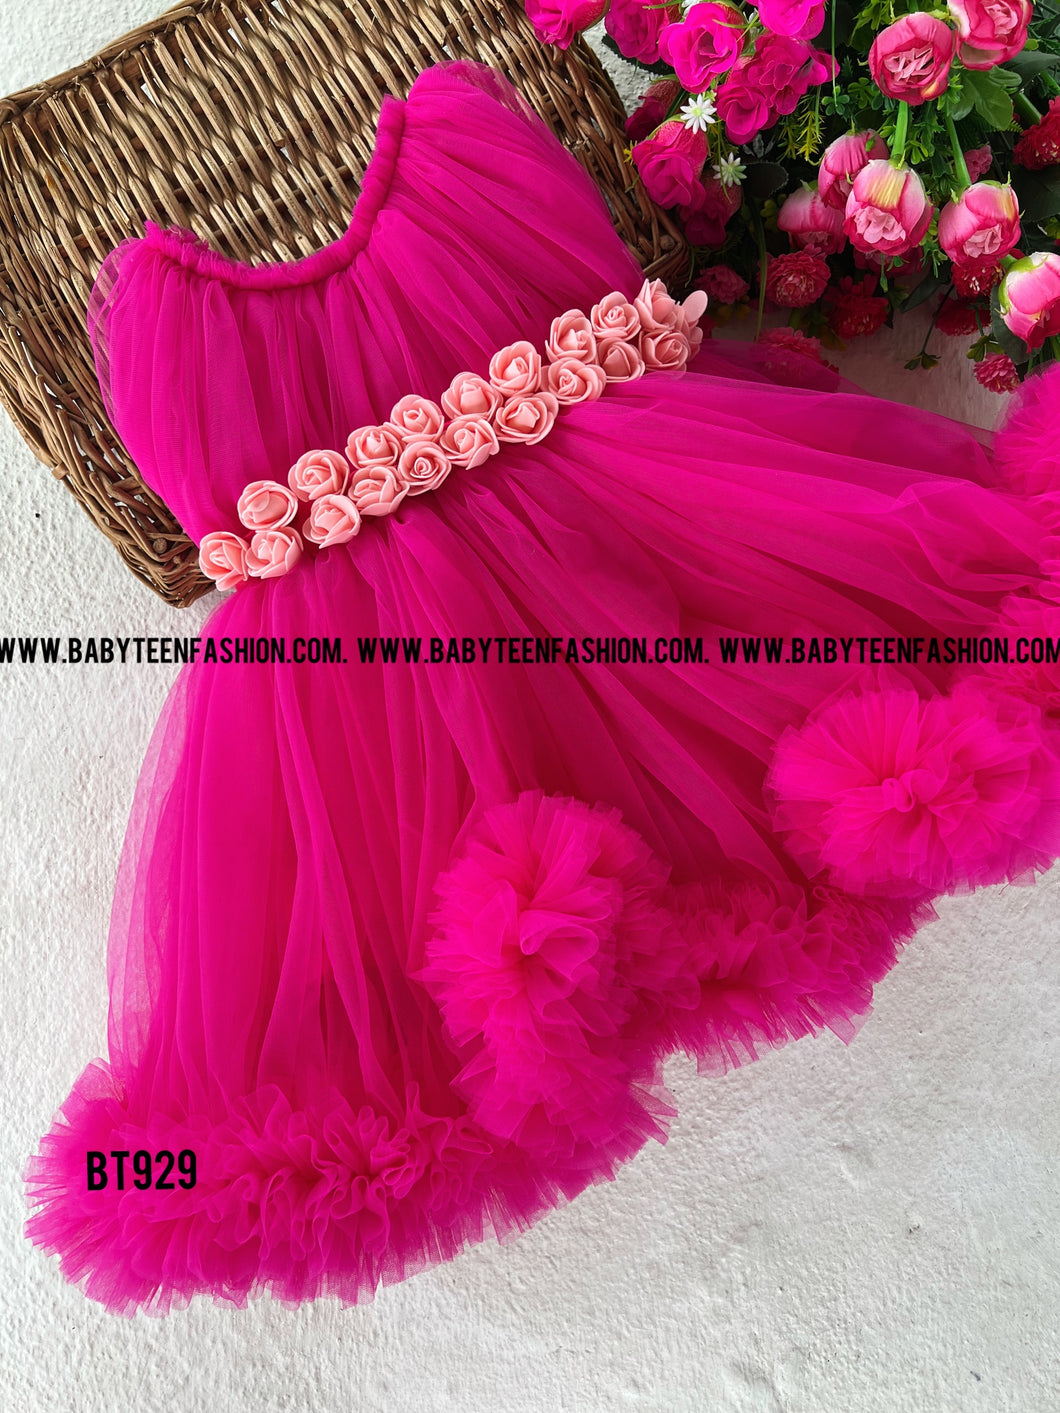 BT929 Princess Pink Flare Dress – Celebrate in Style!